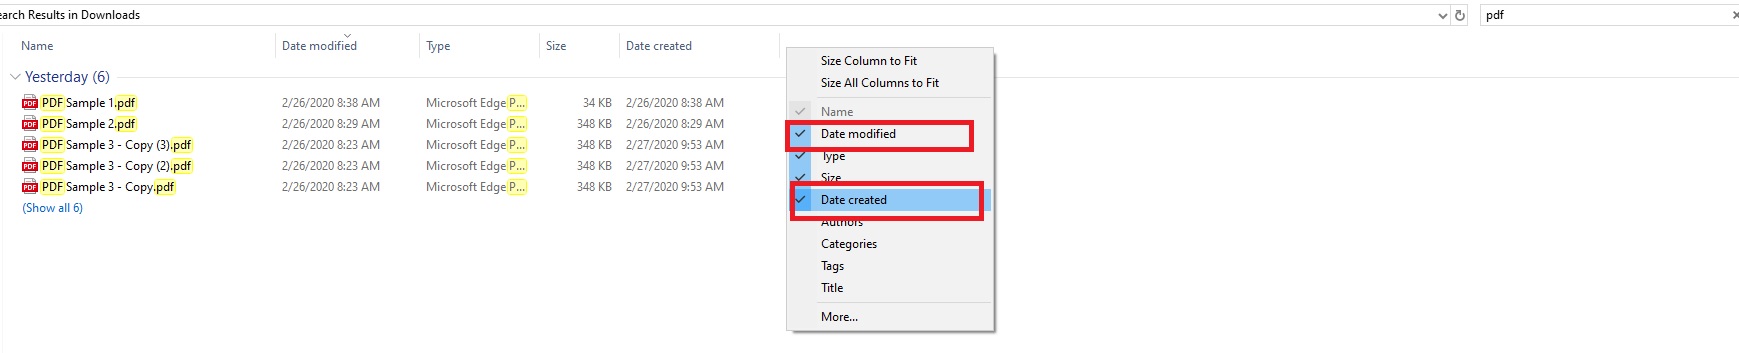 Windows Explorer search by date calendar not showing up anymore 9315cf32-fa98-4e75-ab7e-16a843fe58d7?upload=true.jpg